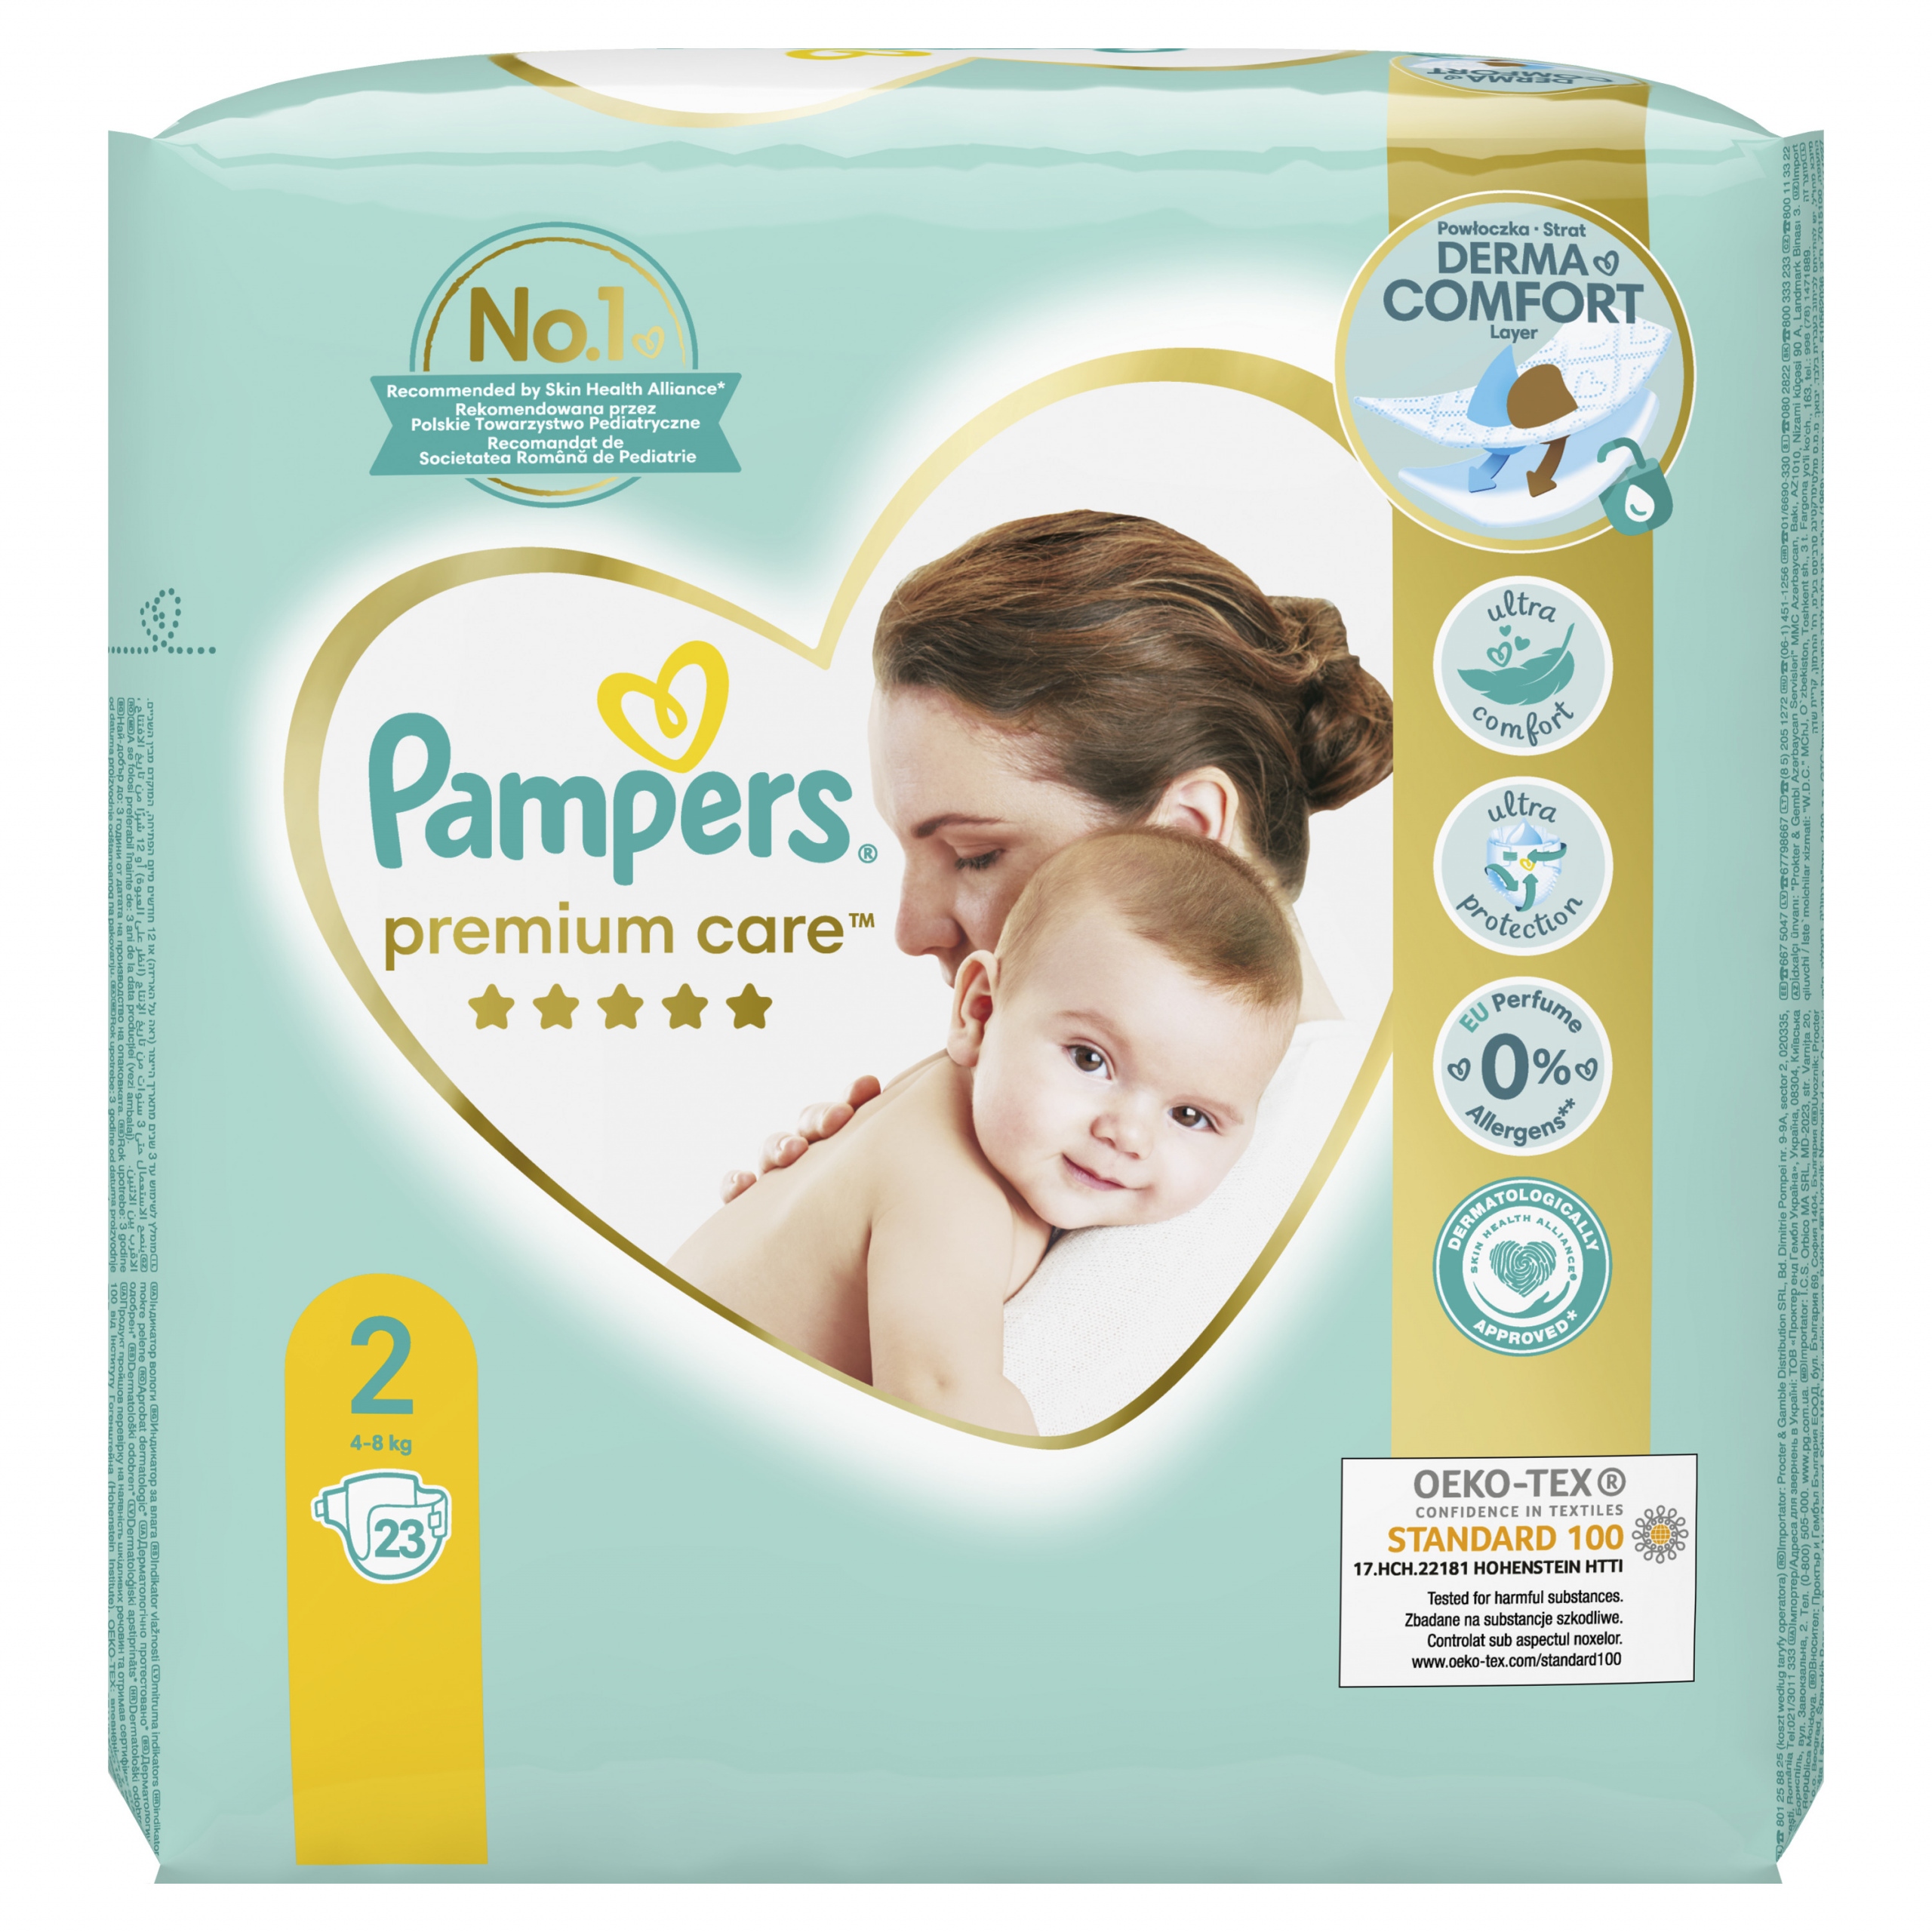 pampers baby dry size 3